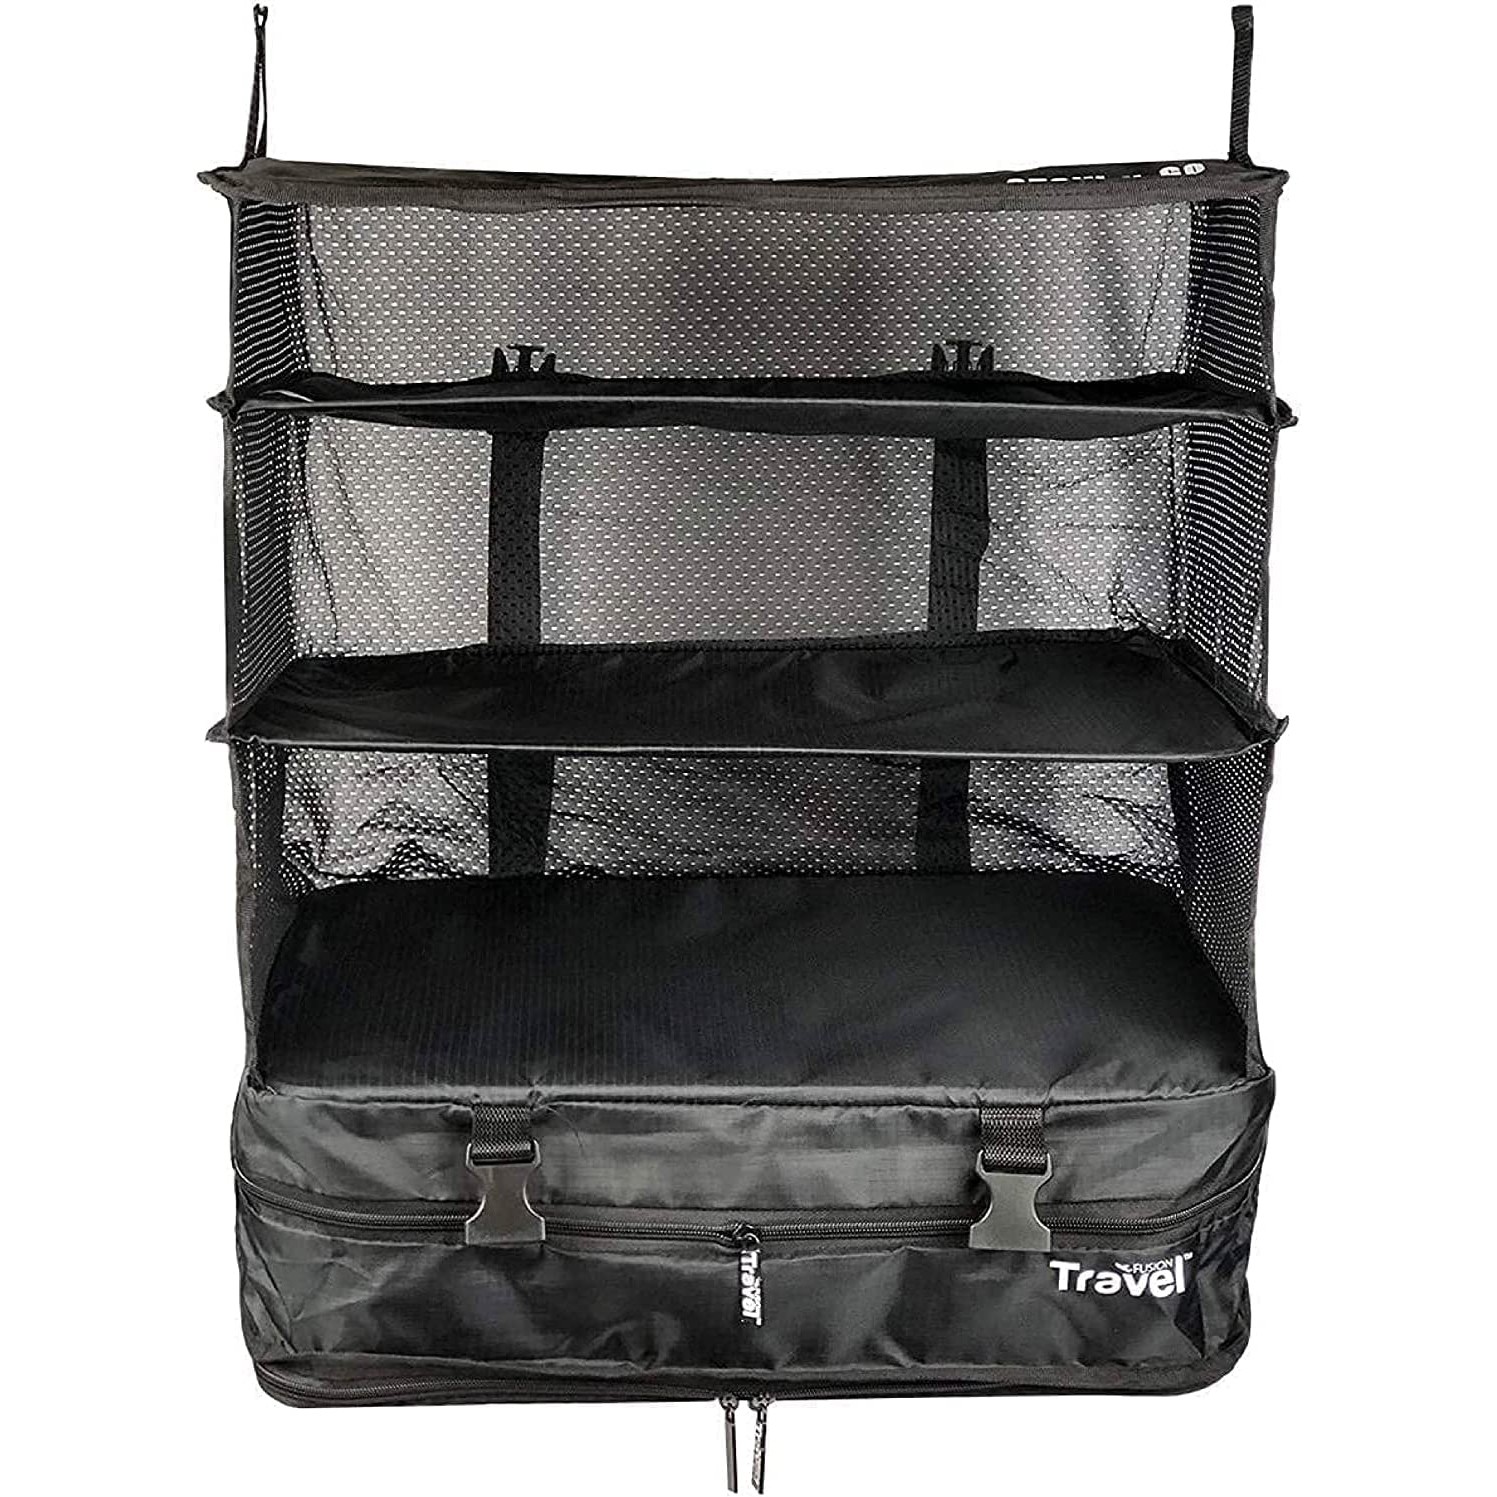 https://video-images.vice.com//products/64936d7bb2cfd4e700498801/gallery-image/1687383420463-stow-n-go-luggage-organizer.jpeg?crop=0.7000000000000001xw:1xh;center,center